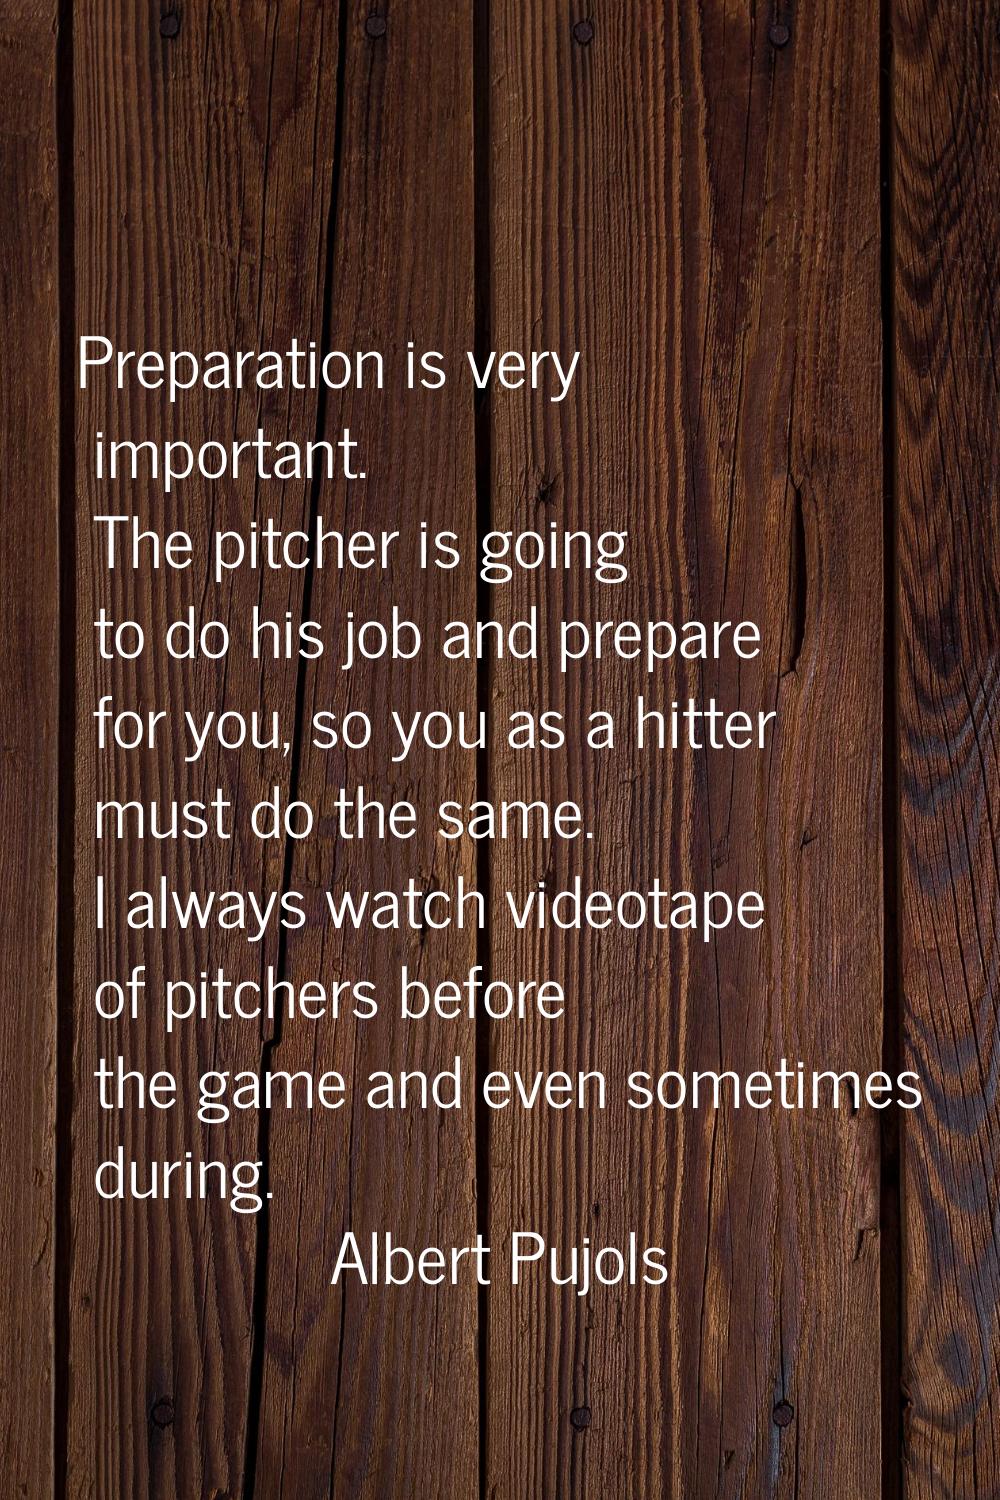 Preparation is very important. The pitcher is going to do his job and prepare for you, so you as a 